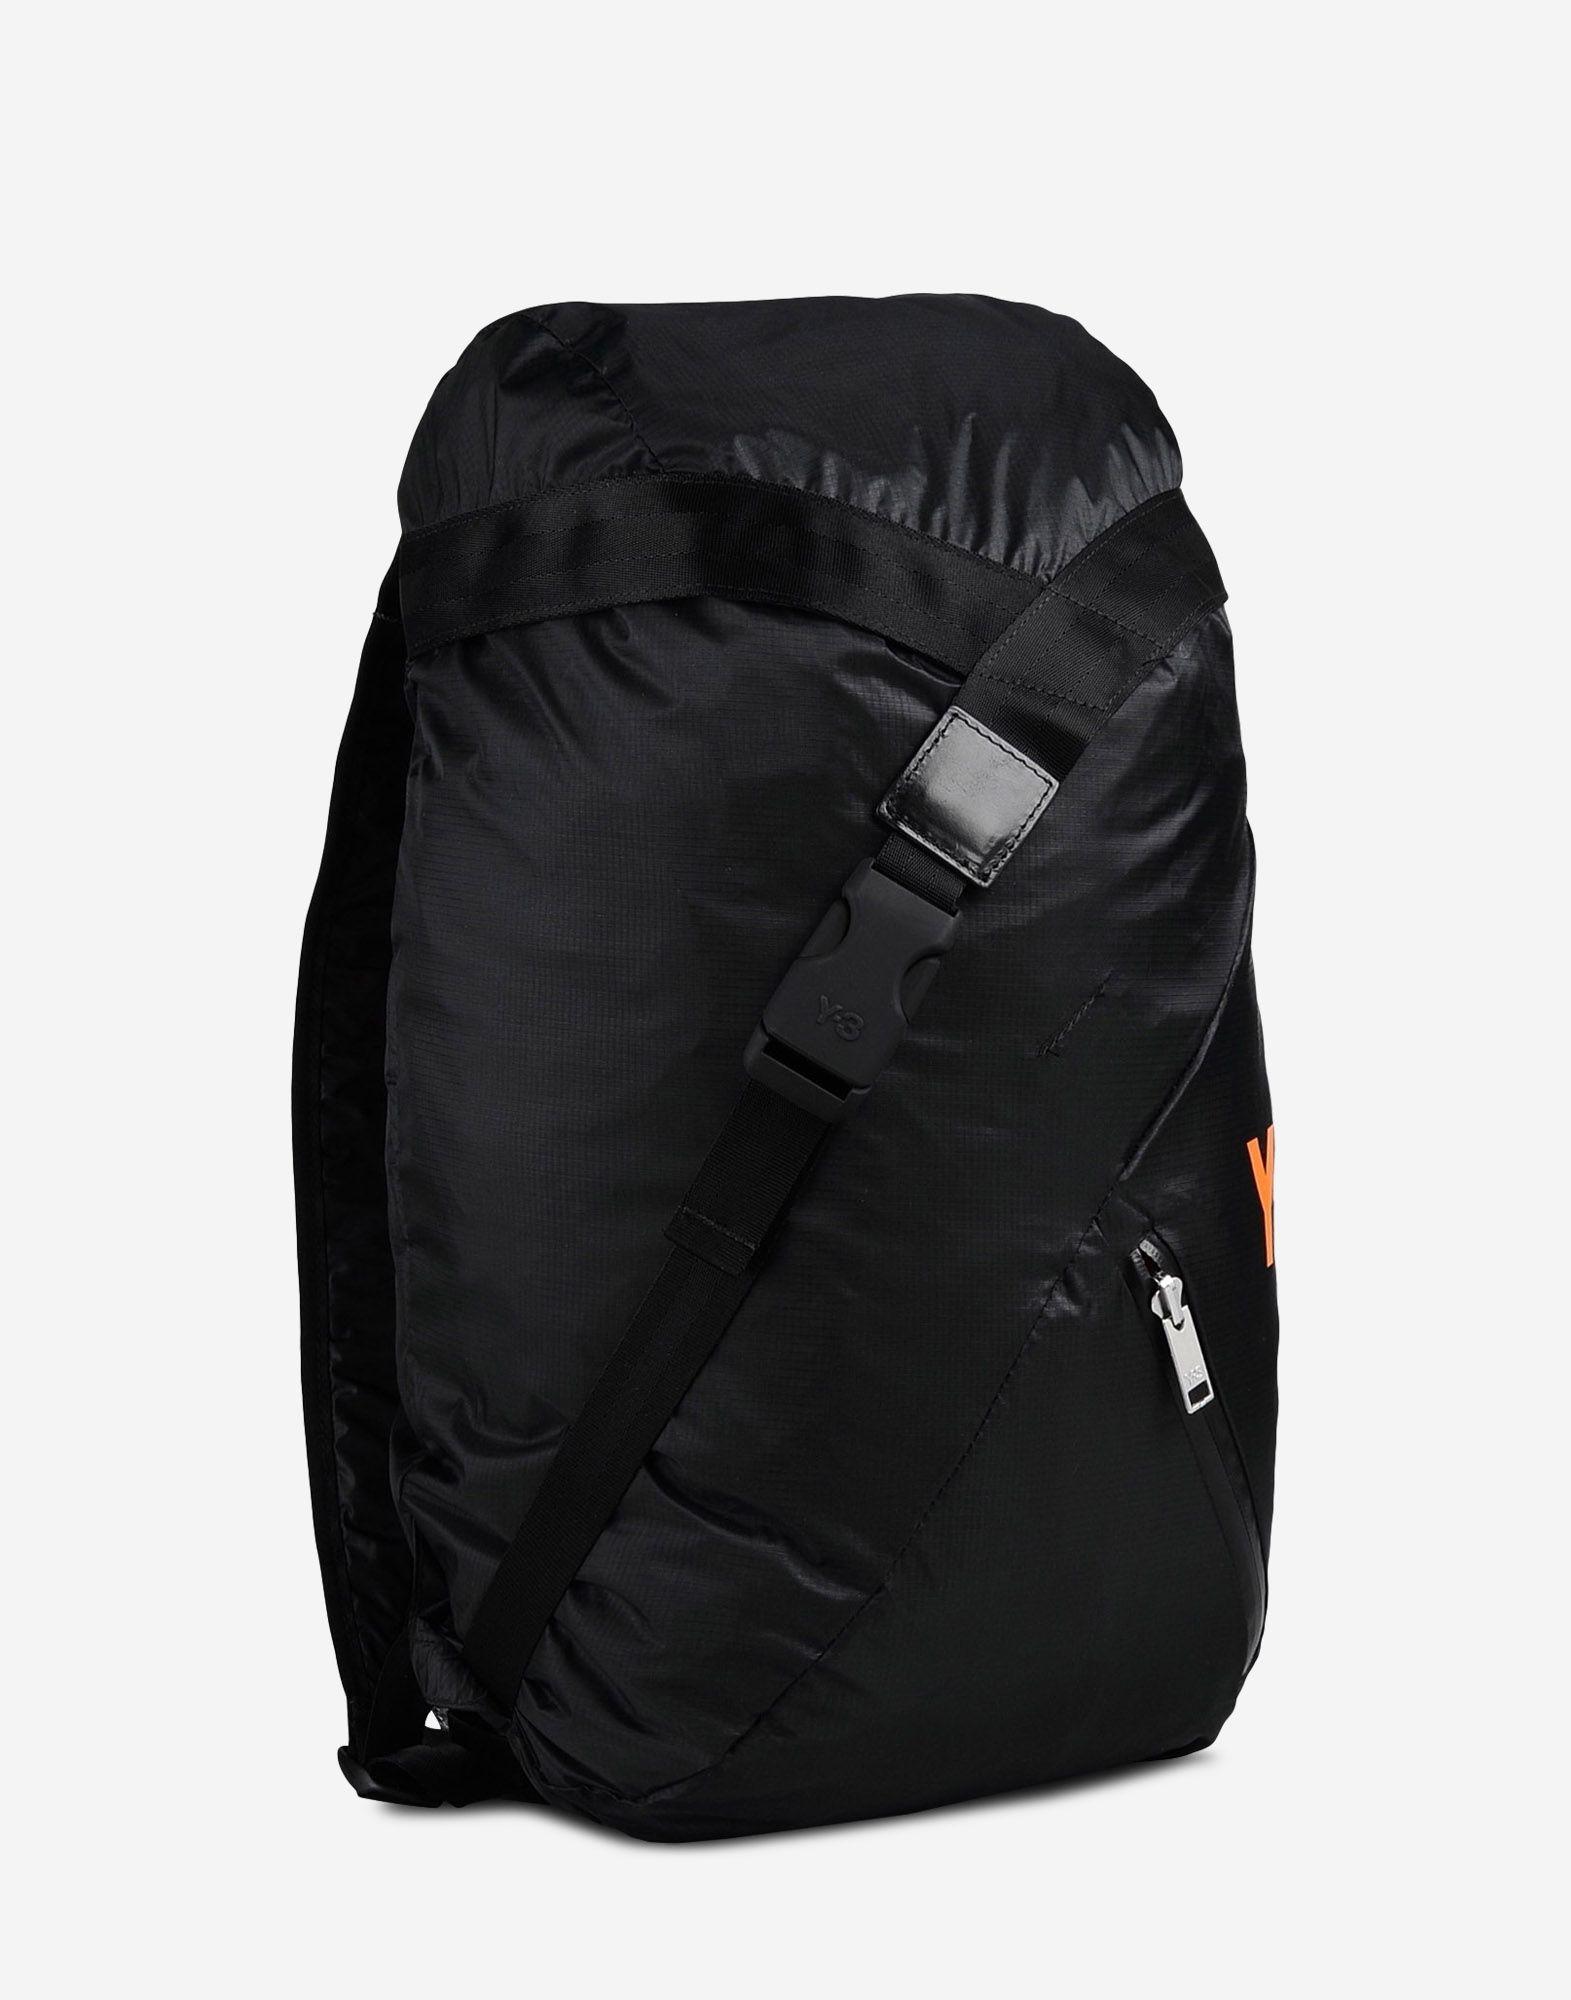 Y 3 FS Pack Backpack for Women | Adidas Y-3 Official Store